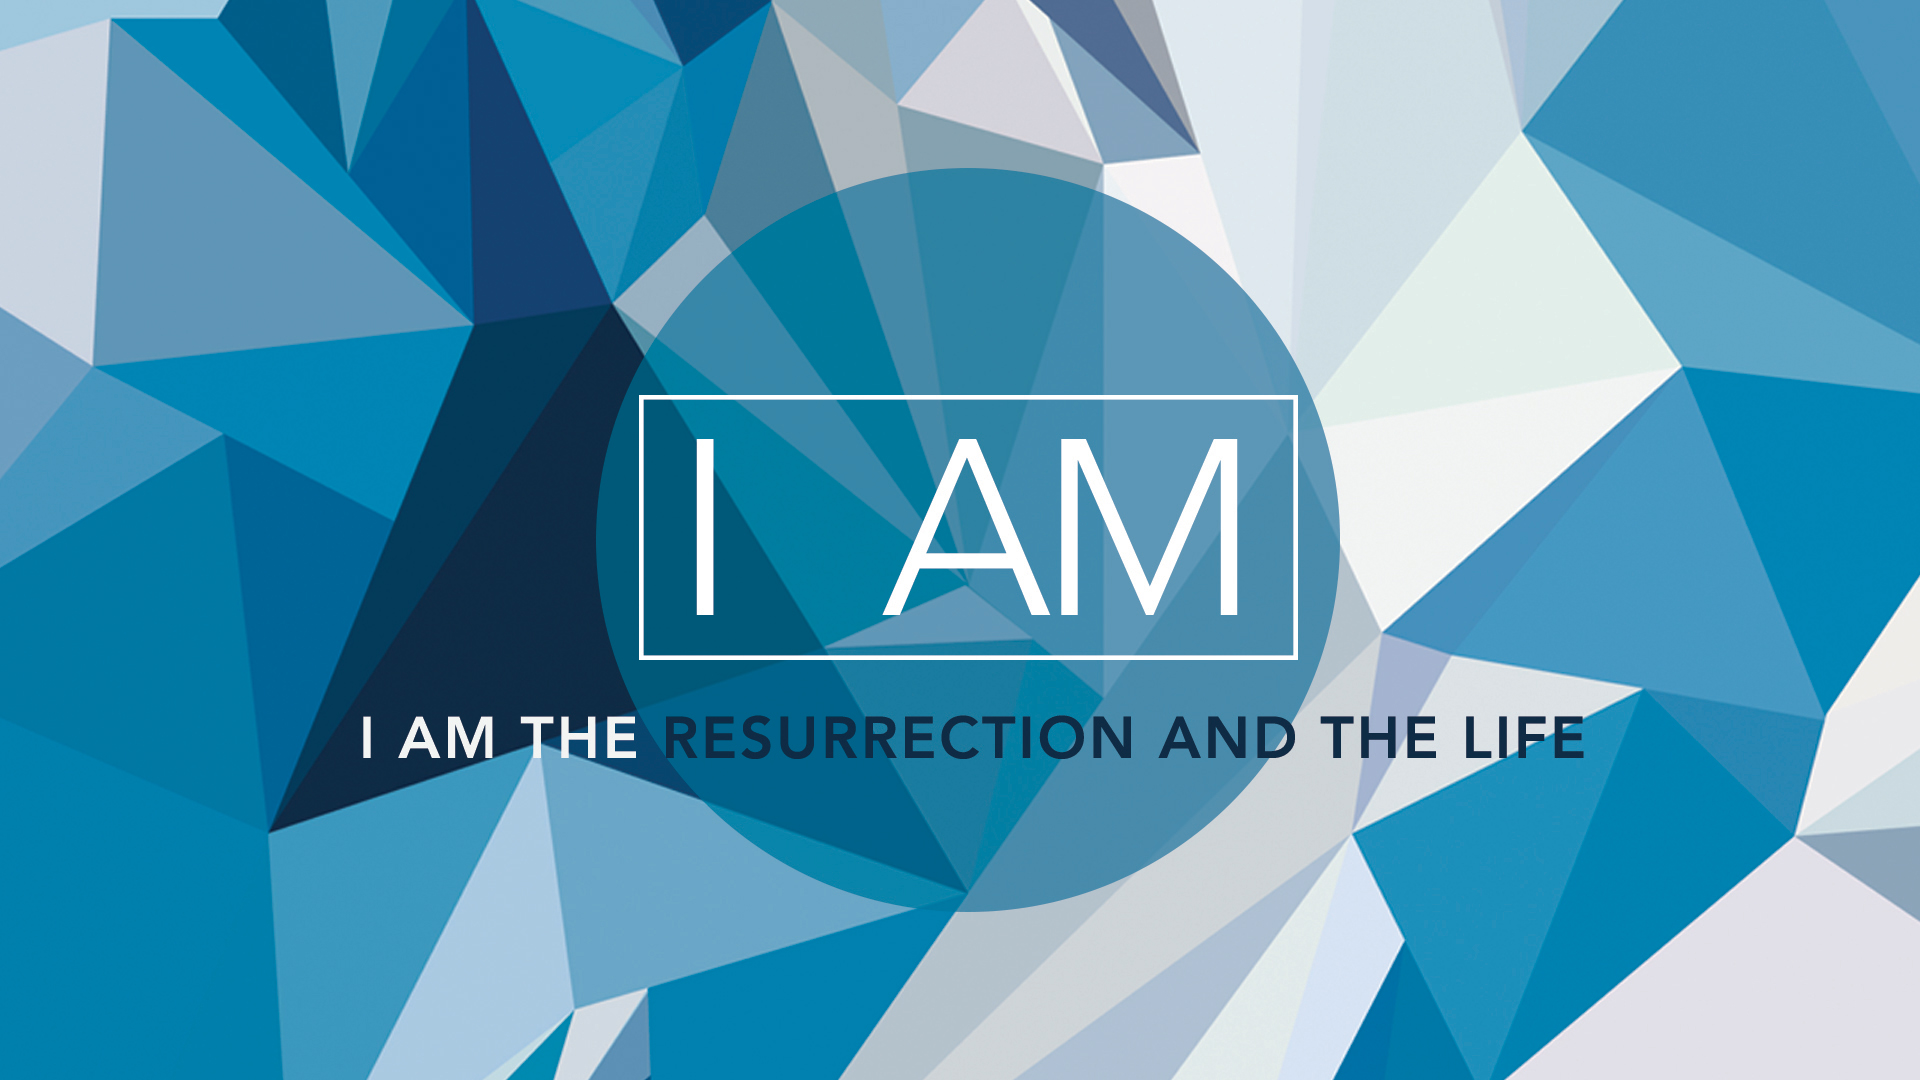 I am: The Resurrection and the Life